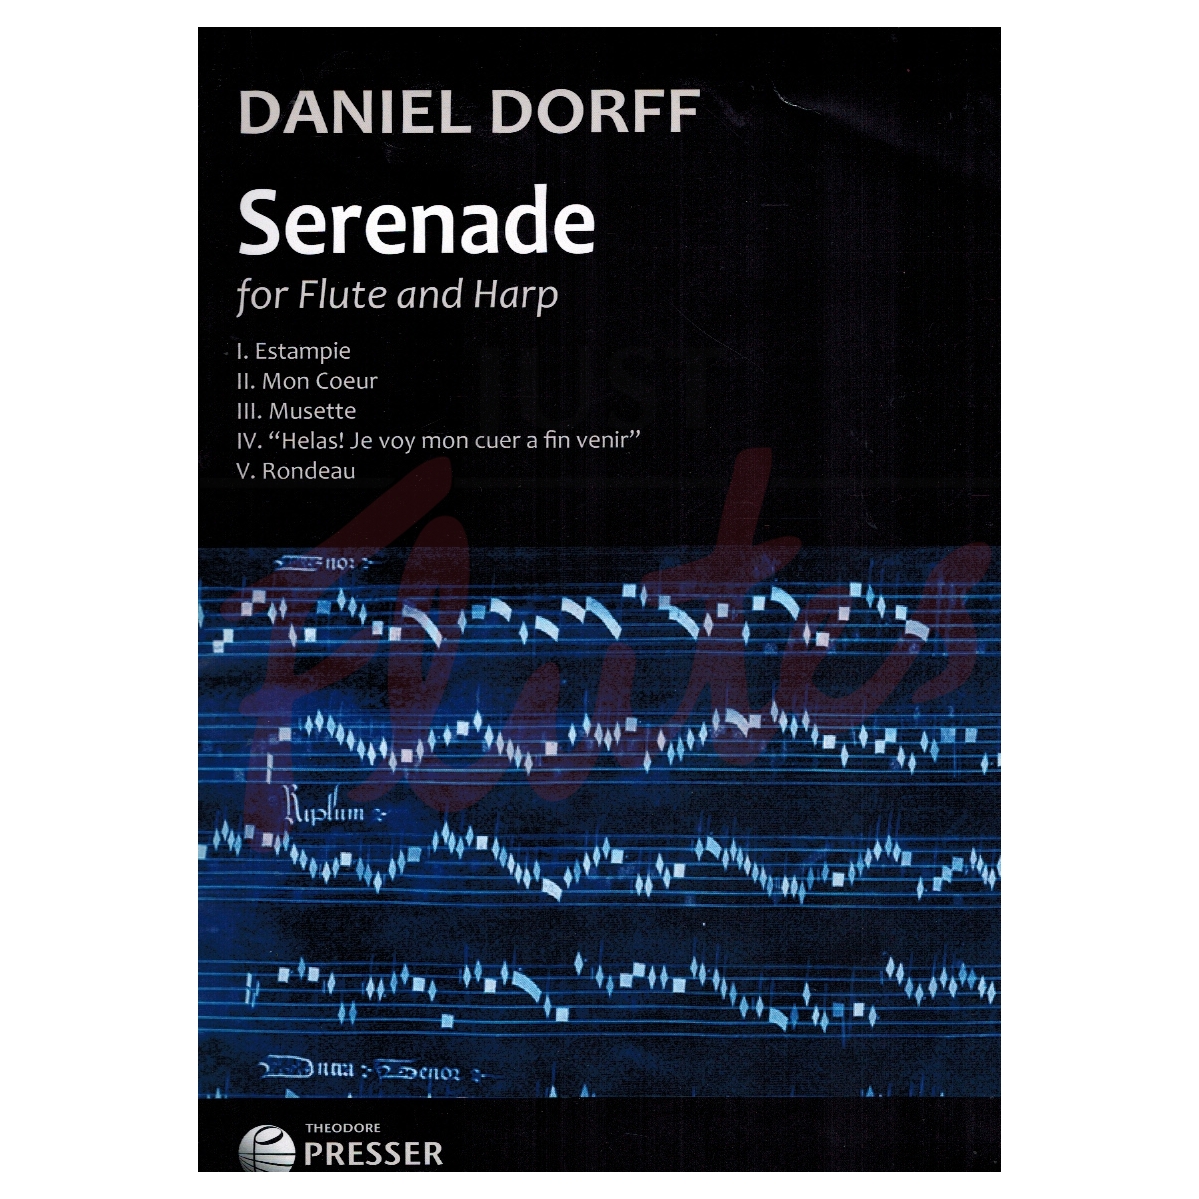 Serenade for Flute and Harp